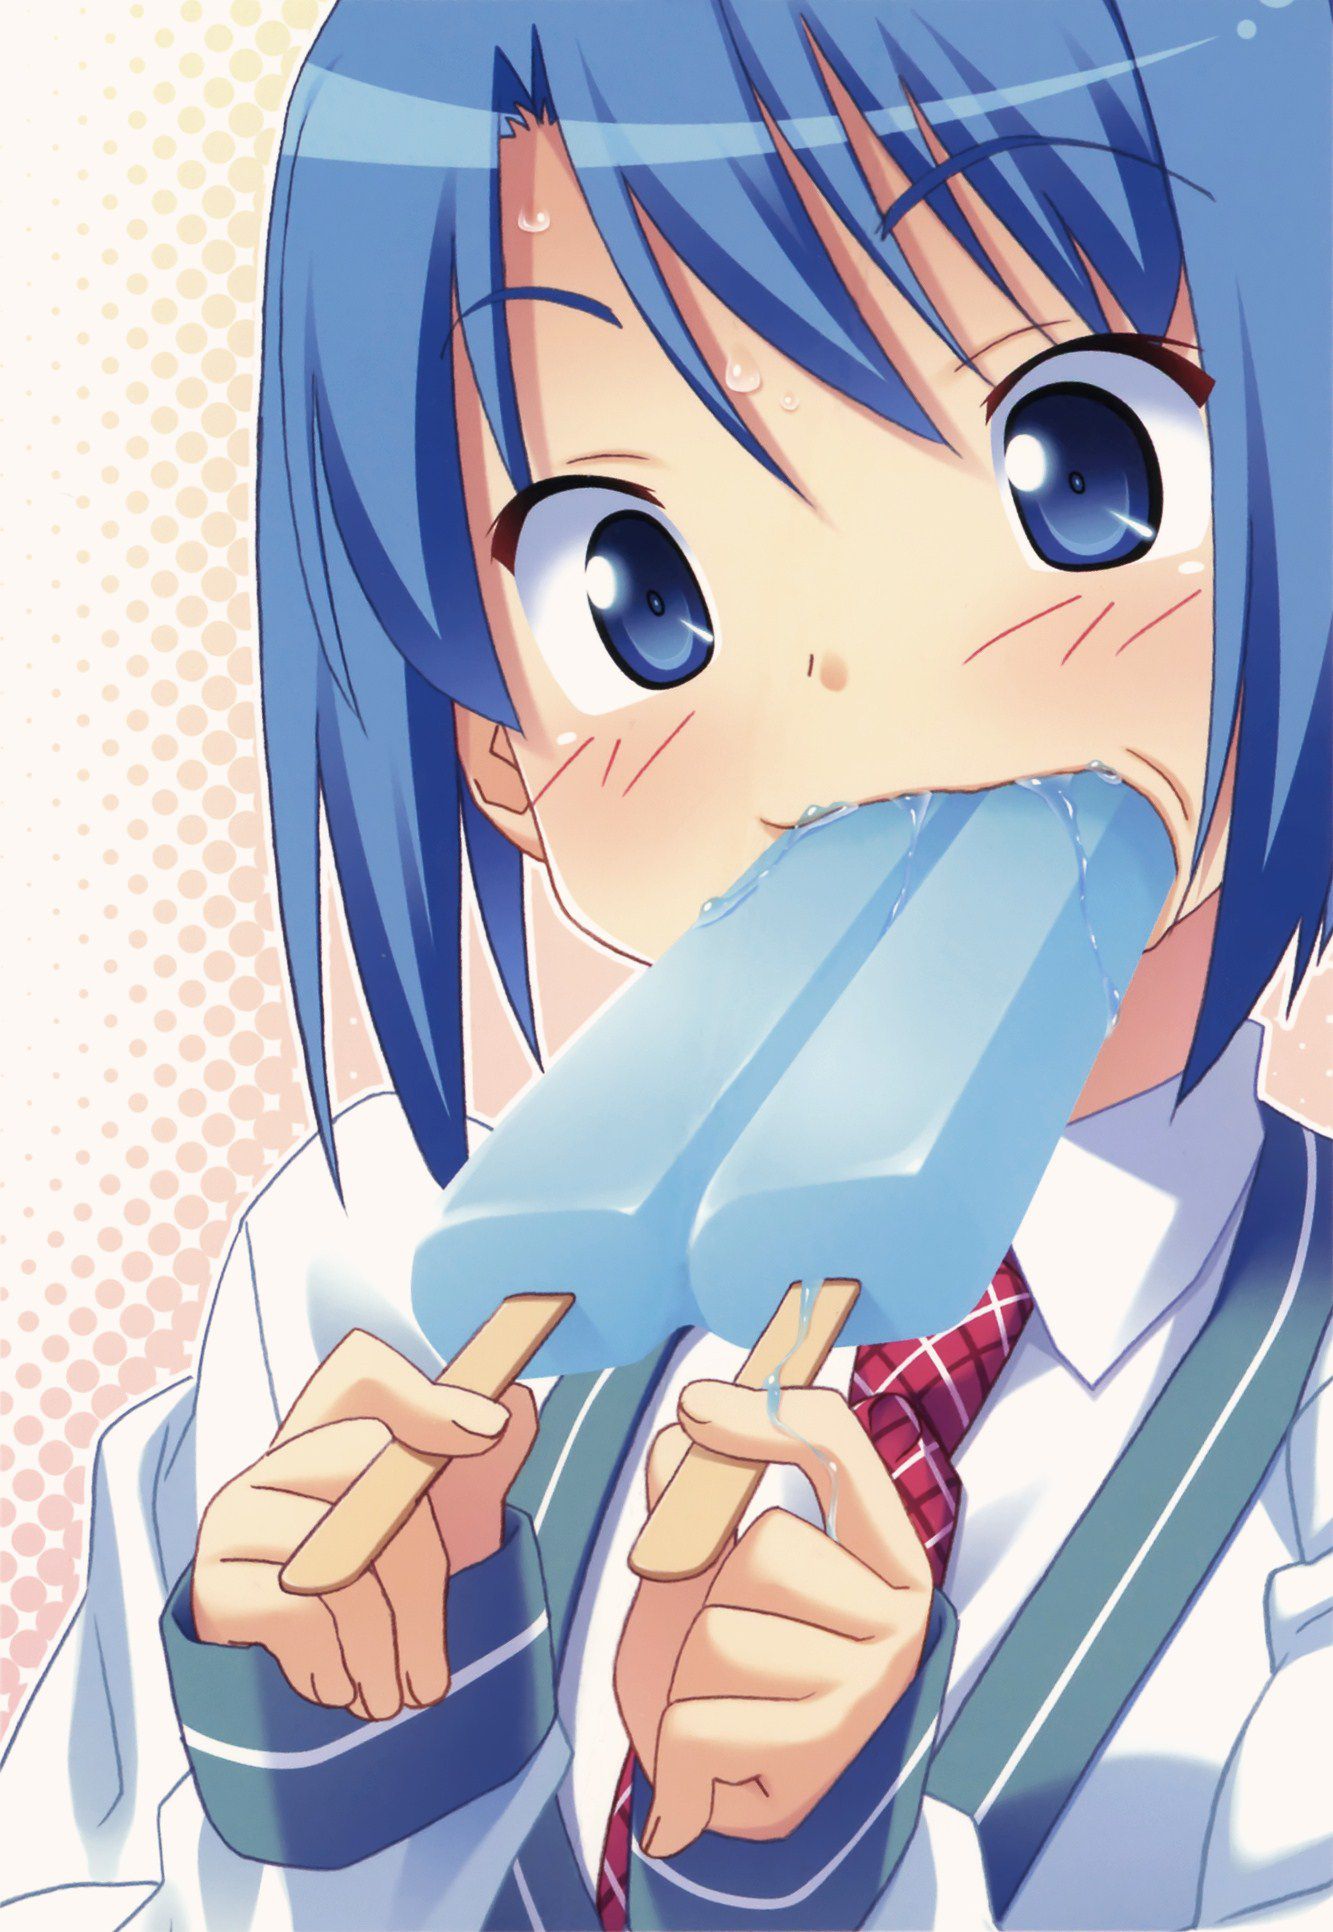 55 an obscene mouth licking ice cream 2-d girl images 32